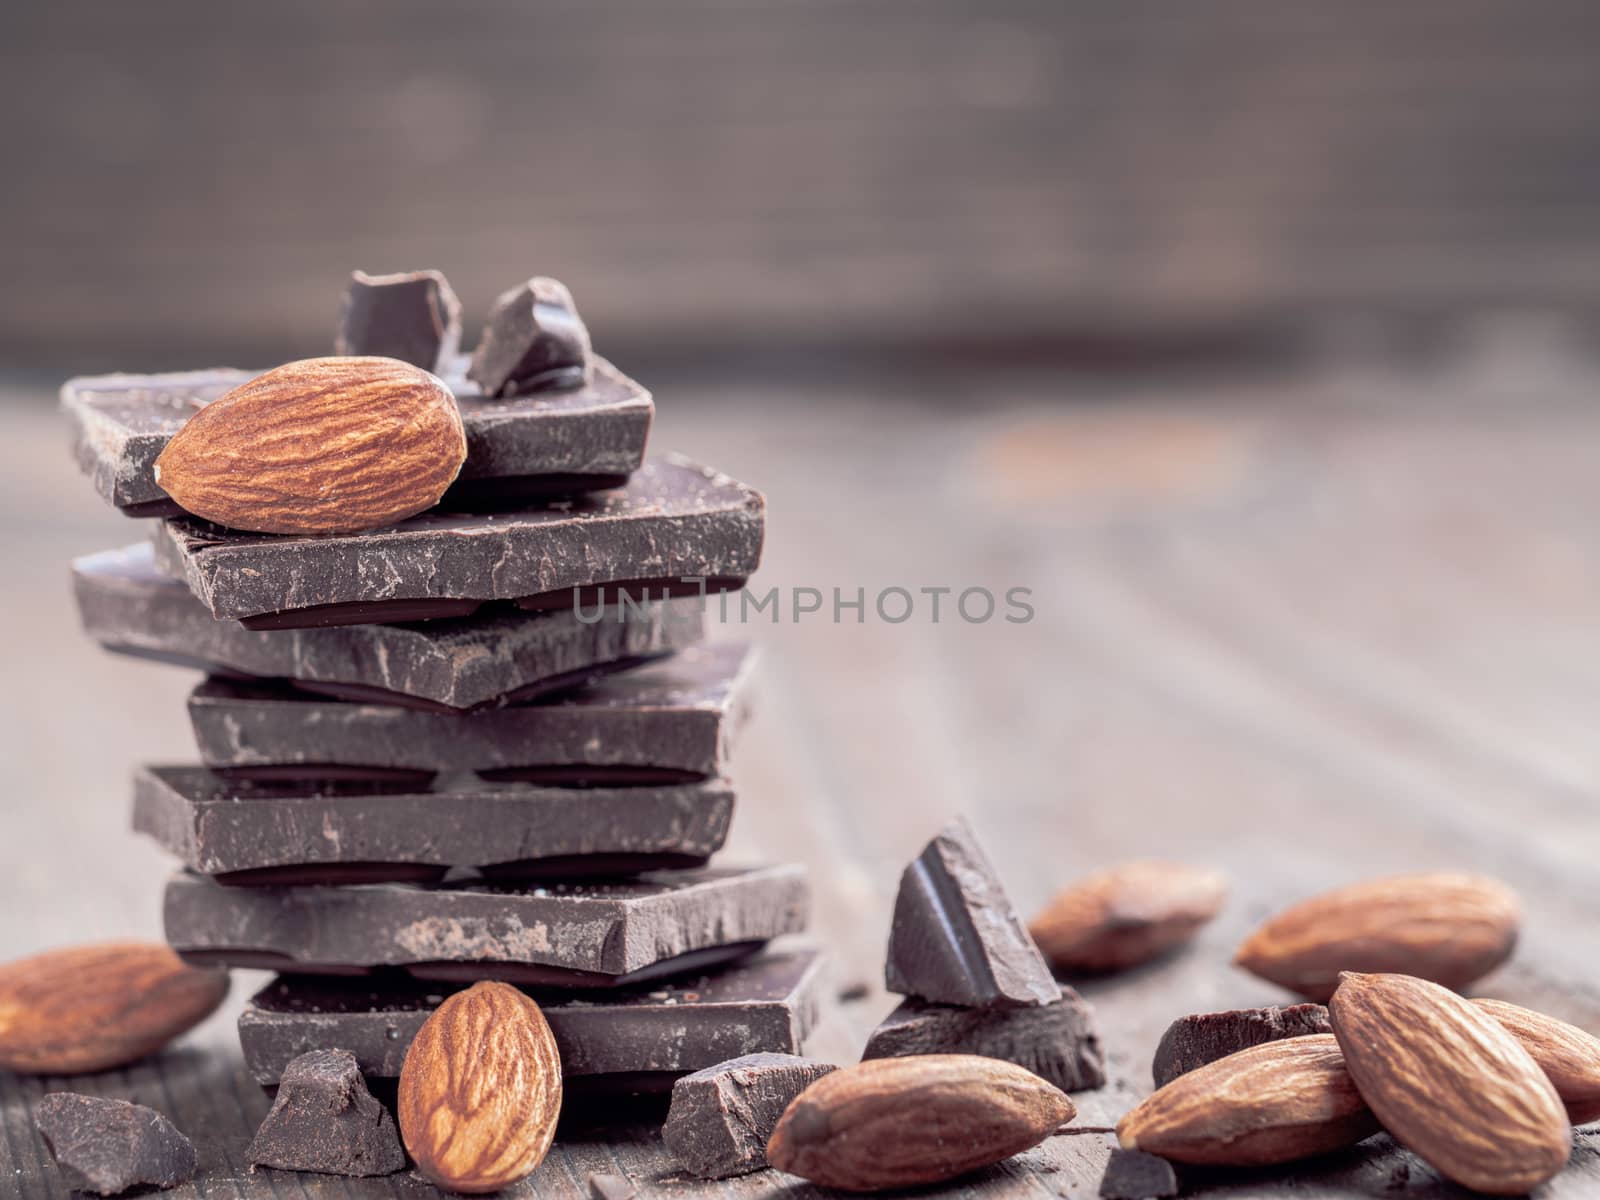 Stack of dark chocolate and whole almond with copy space. Chocolate with crumbs and almonds on wooden background.